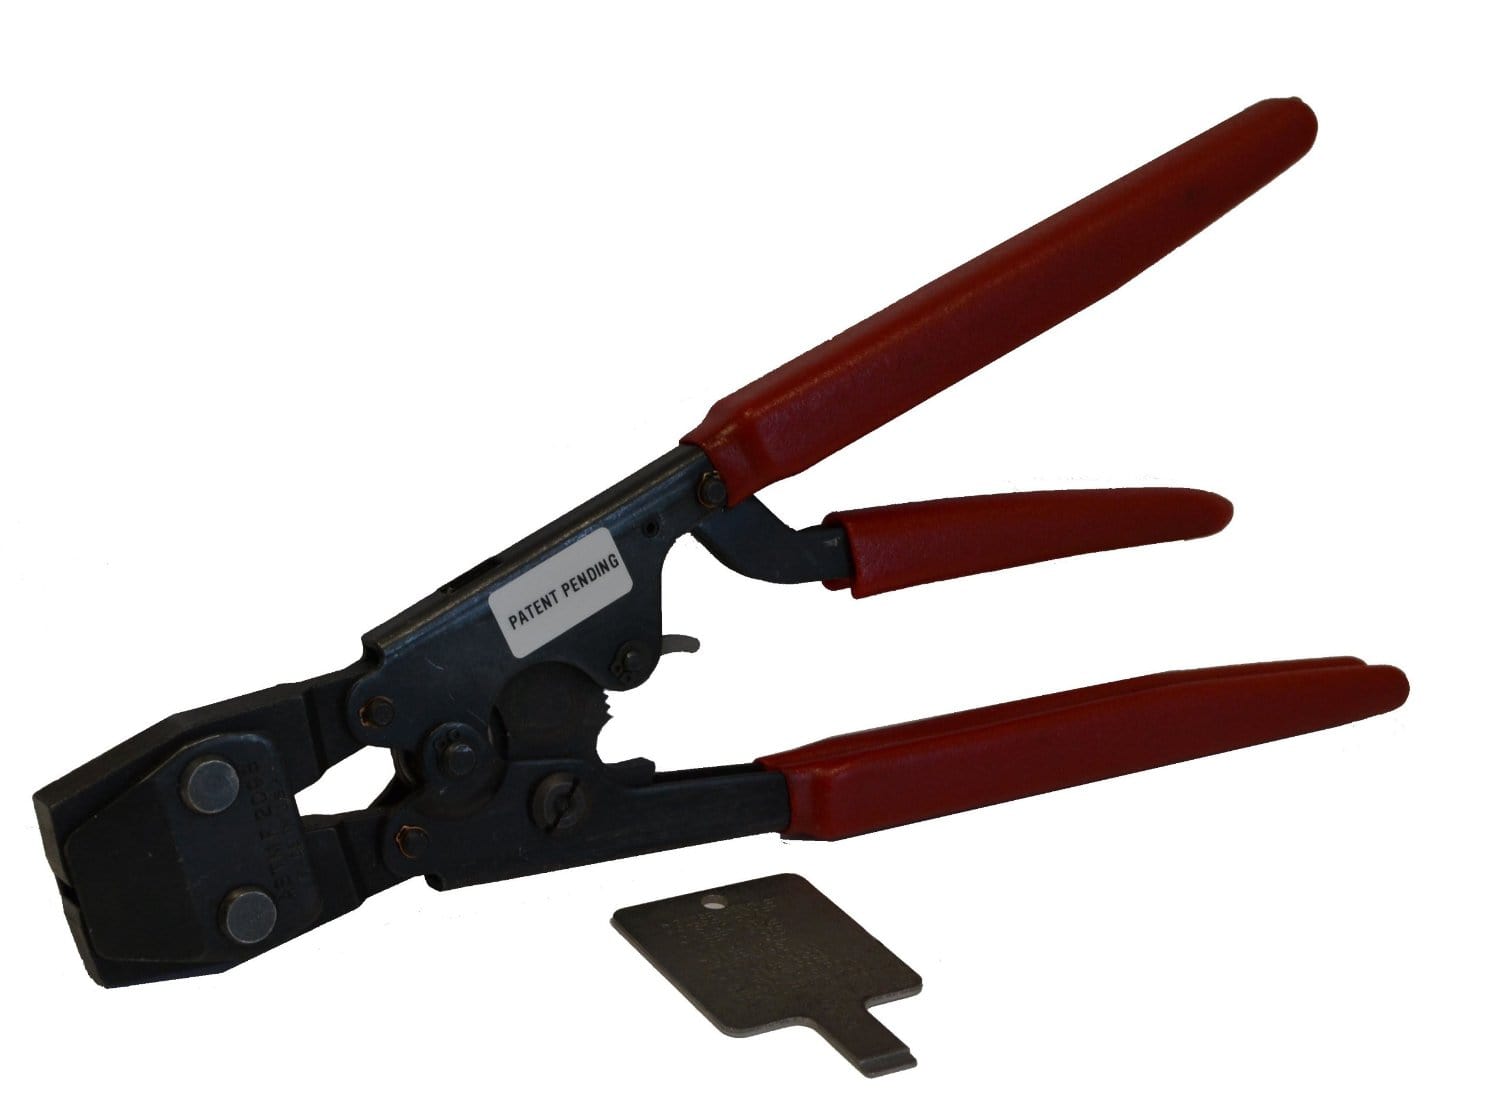 Sargent PEX Clamp Pincer Ratchet Tool - Three Handled For 3/8" to 1"